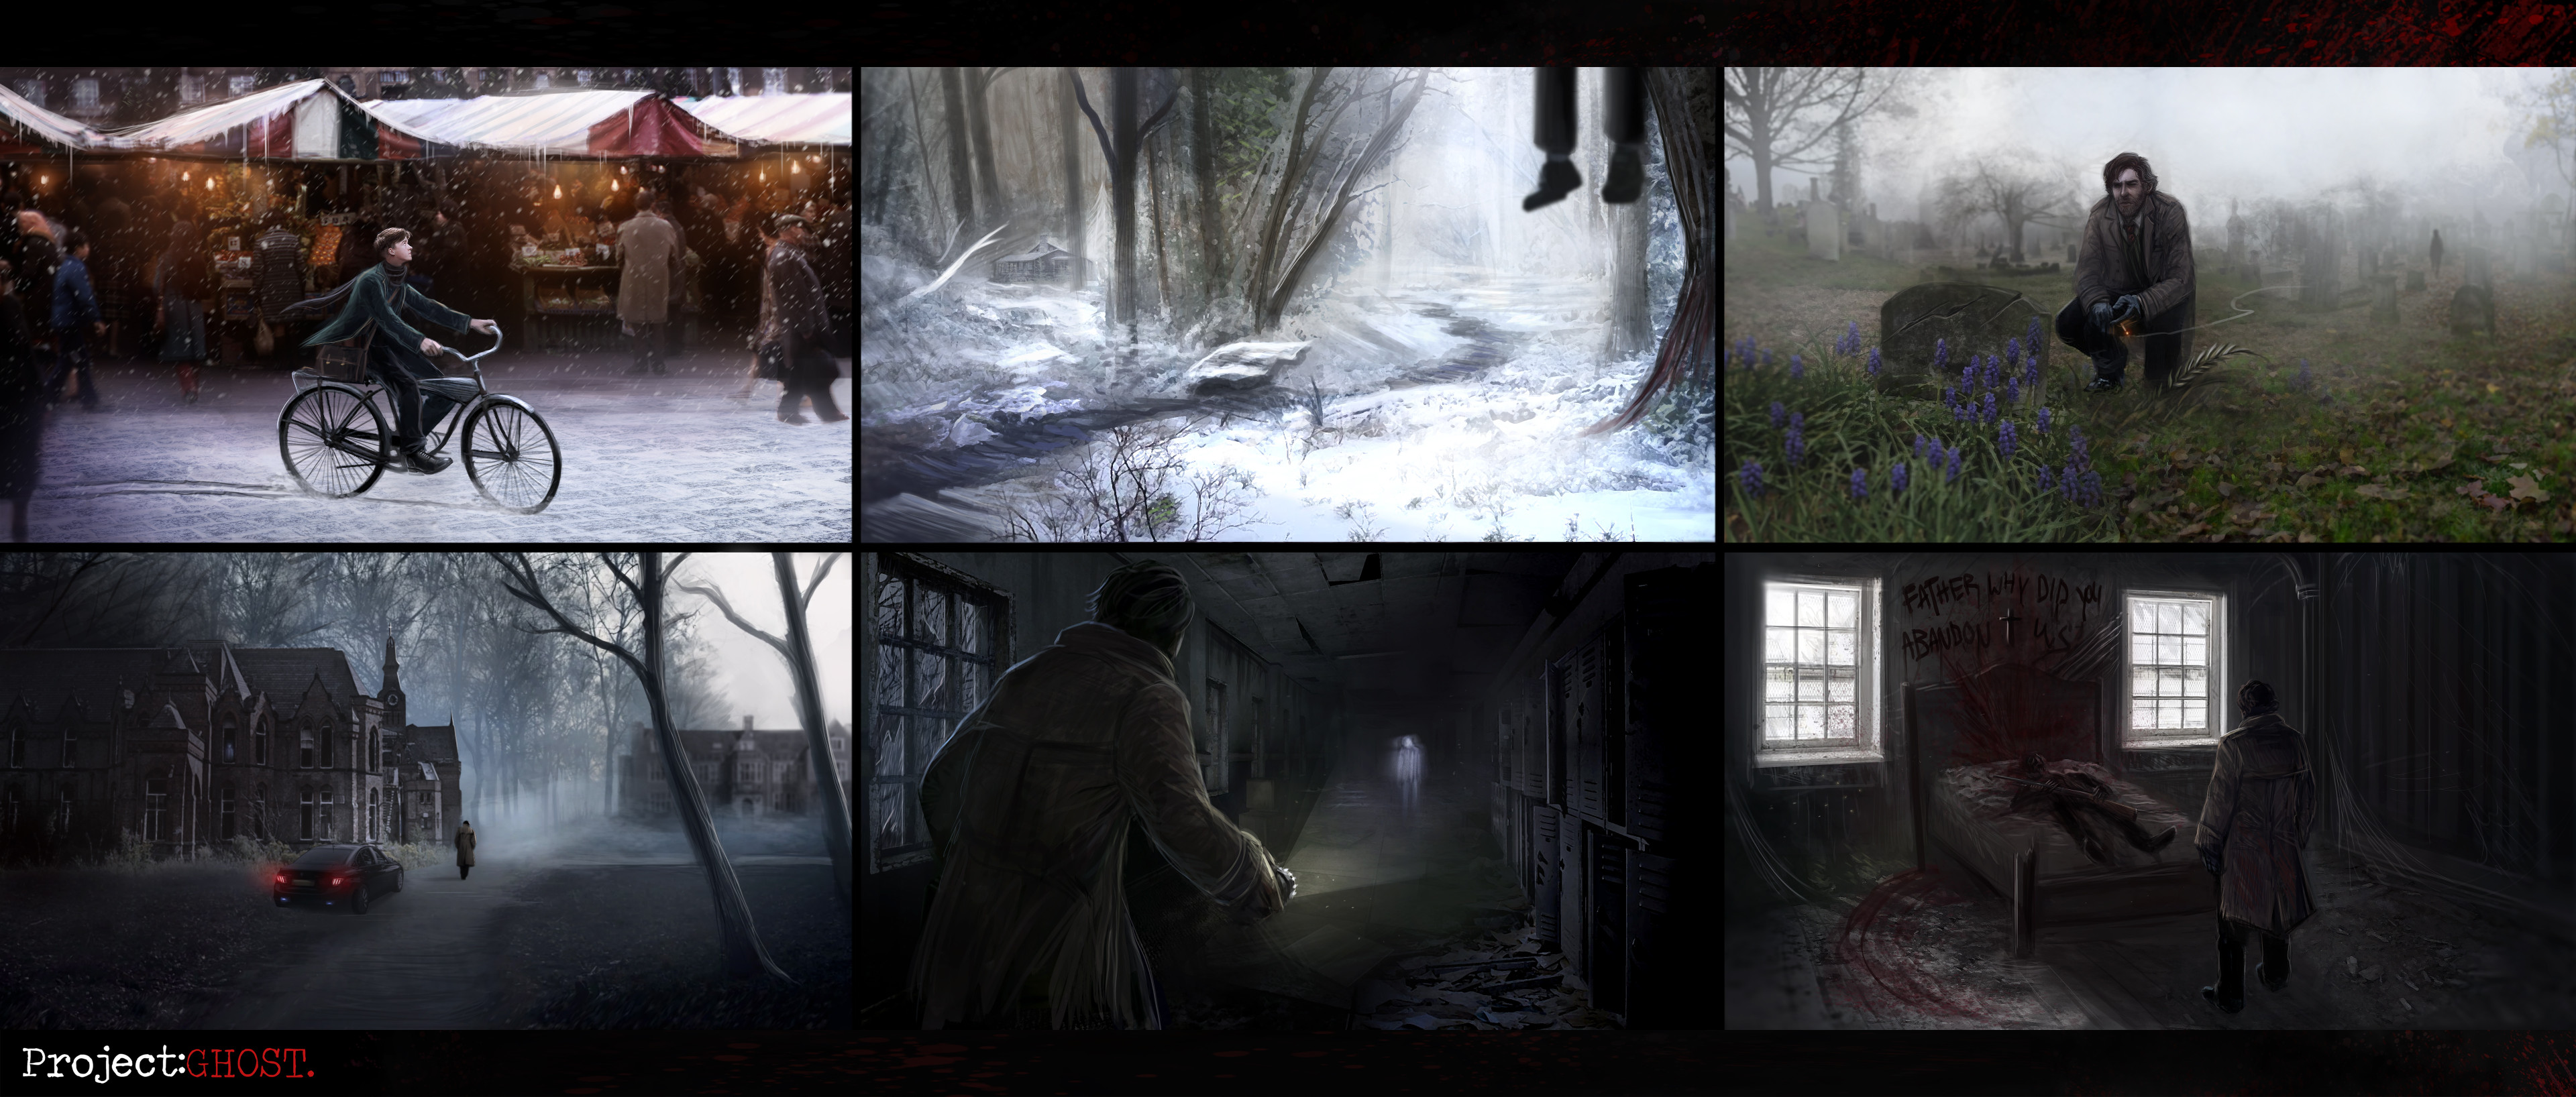 Final thumbnails. (six for now but may update to nine!)